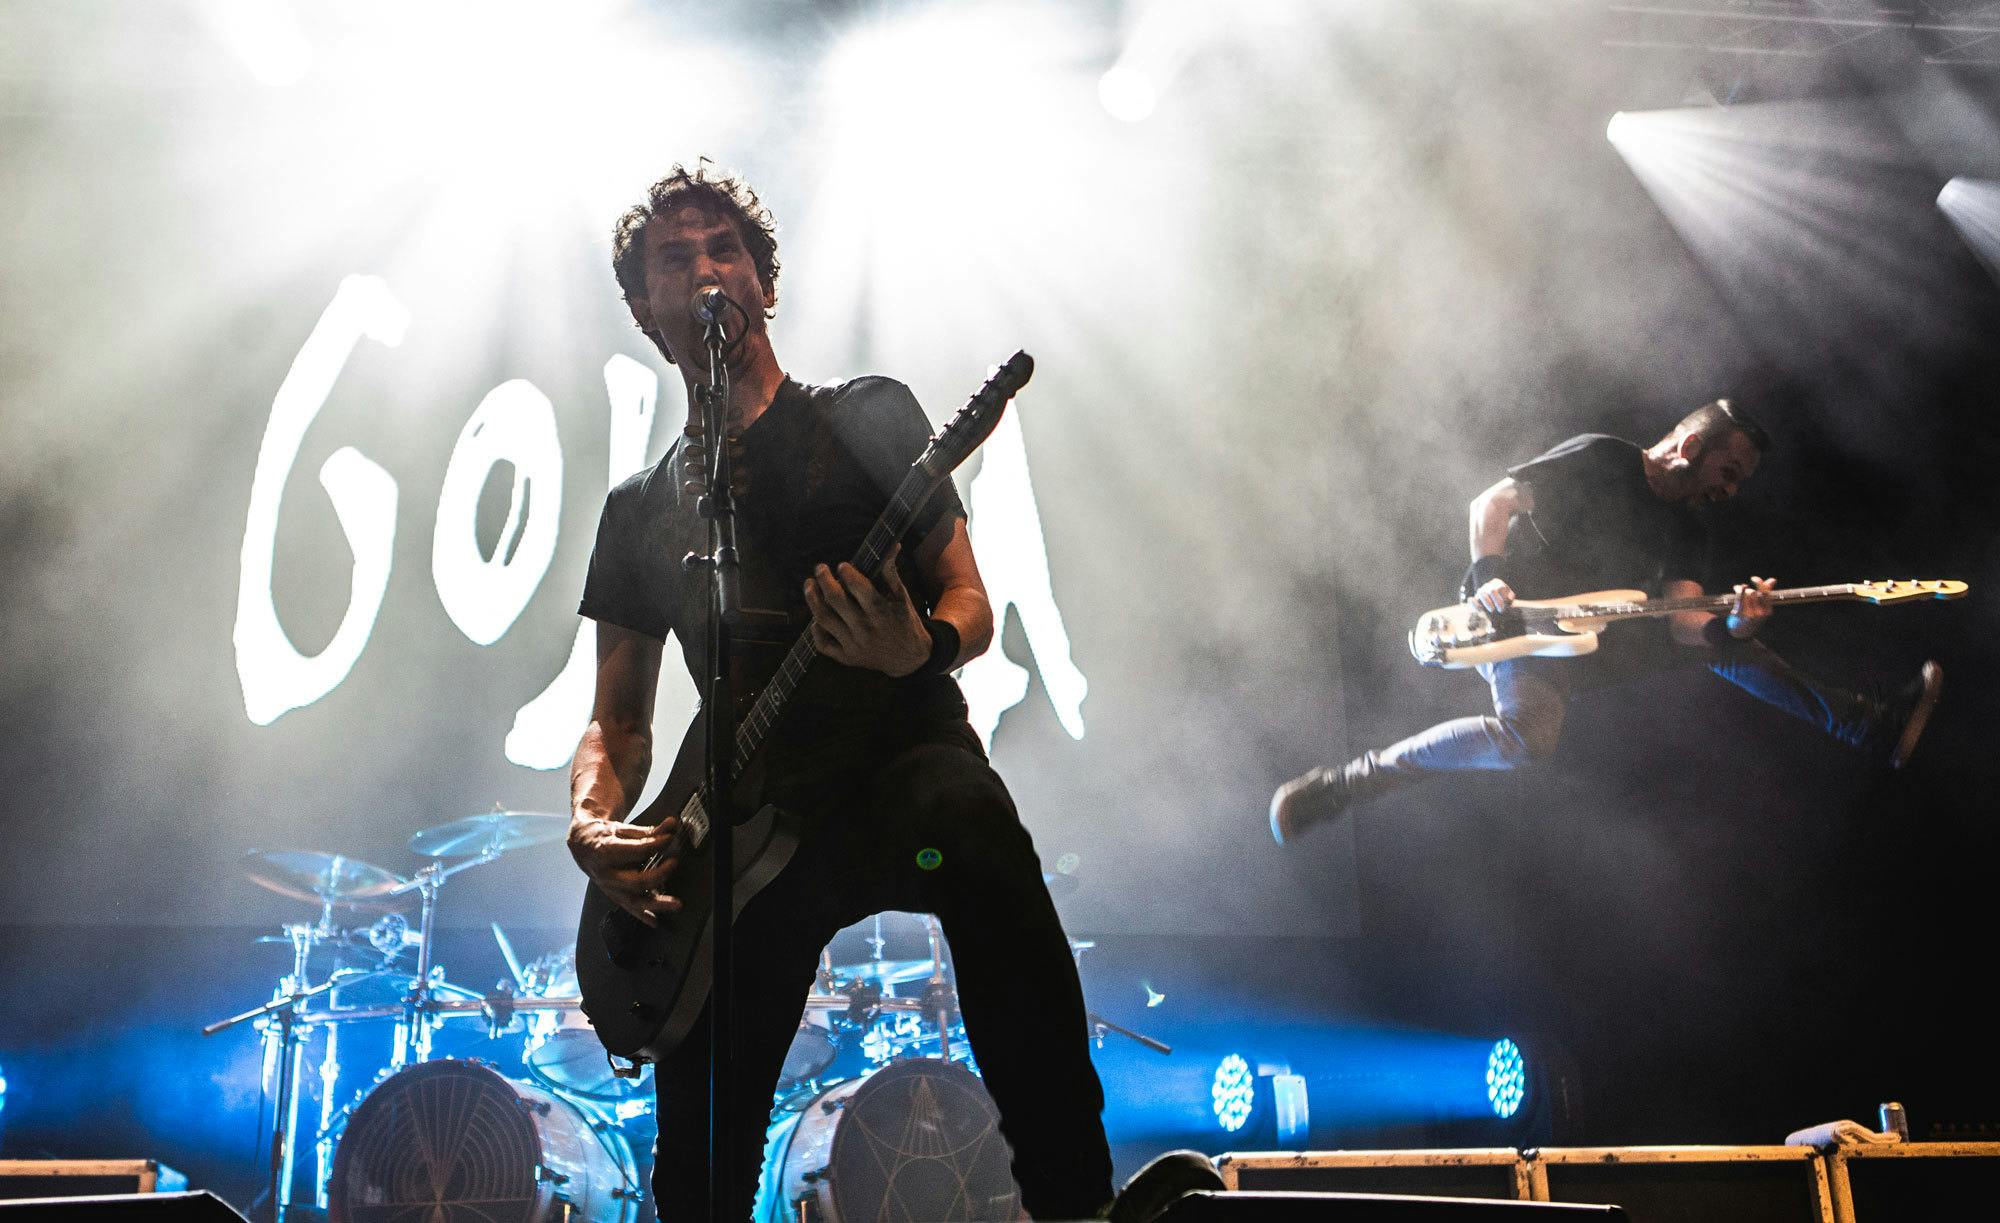 Gojira announce European / UK tour with Alien Weaponry and Employed To Serve